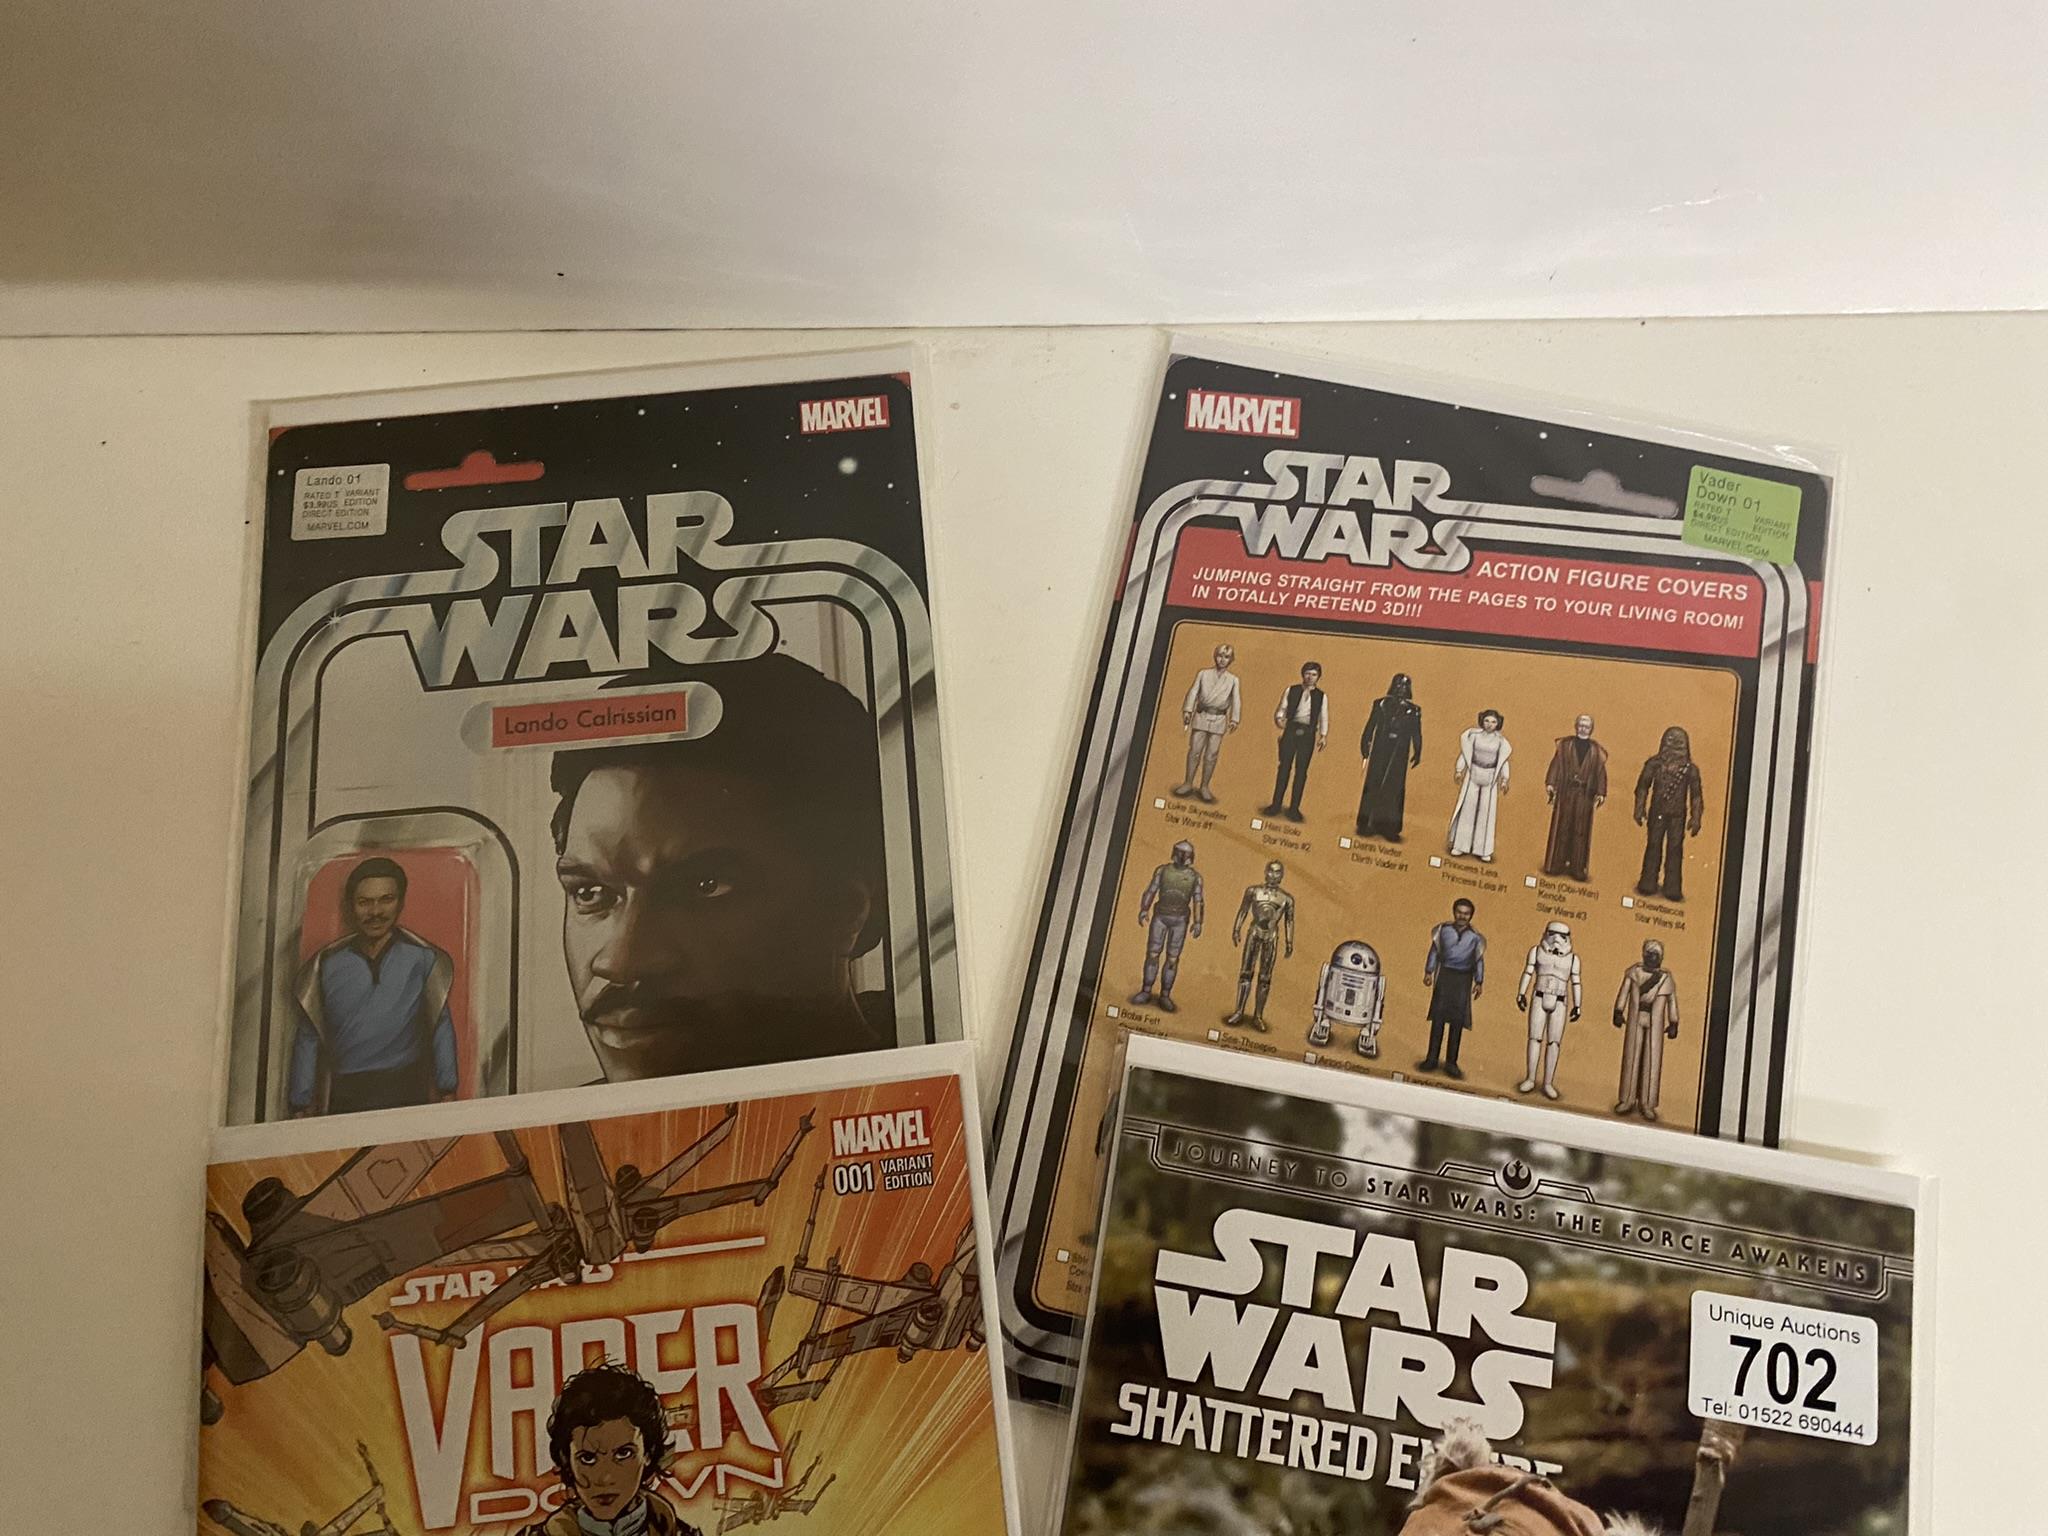 4 Marvel Star Wars comics with Variant covers including Star Wars Shattered Edge 001 Variant Edition - Image 2 of 3